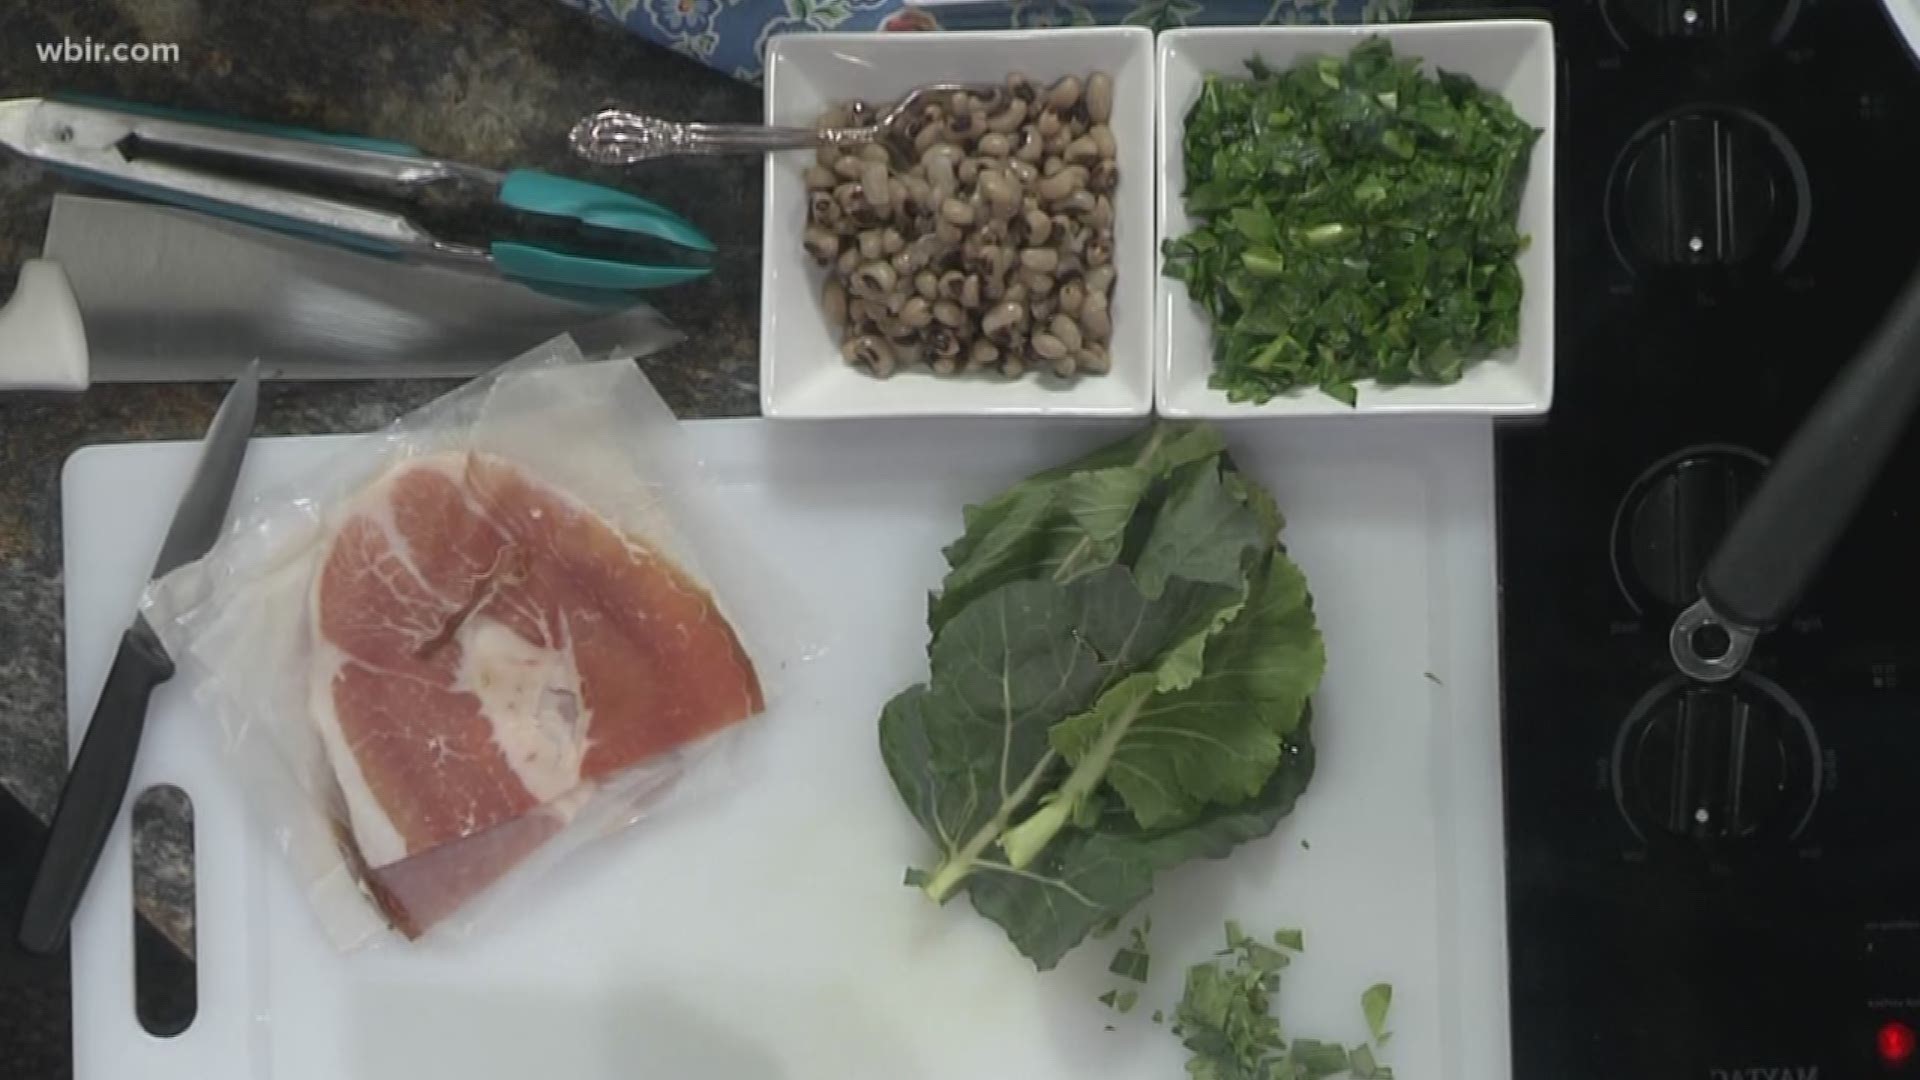 Amy Campbell, host of The Tennessee Farm Table (WDVX & Podcast) shows how to make Smoky Mountain Sushi with Benton's ham and local greens and black eyed peas. For more on Amy's show, visit tennesseefarmtable.com. Jan 24, 2019-4pm